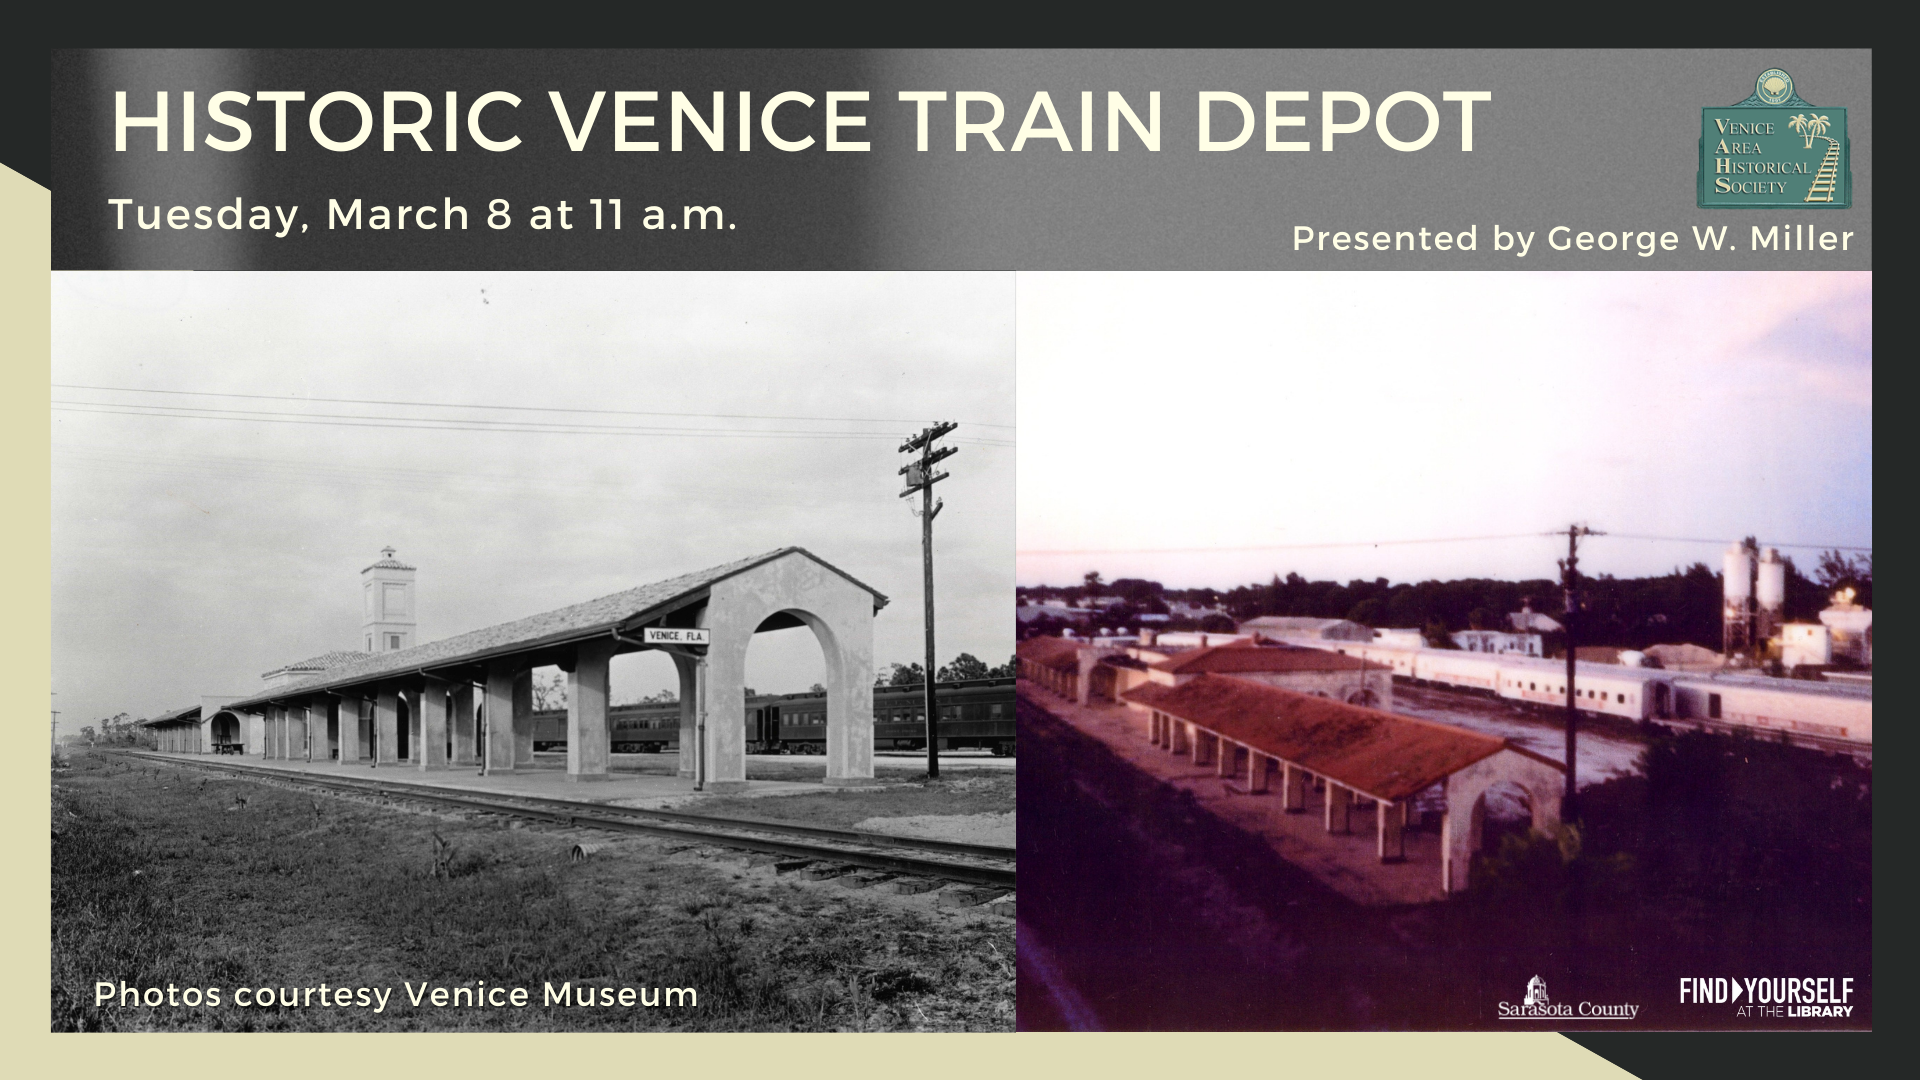 Historical images of Venice Train Depot